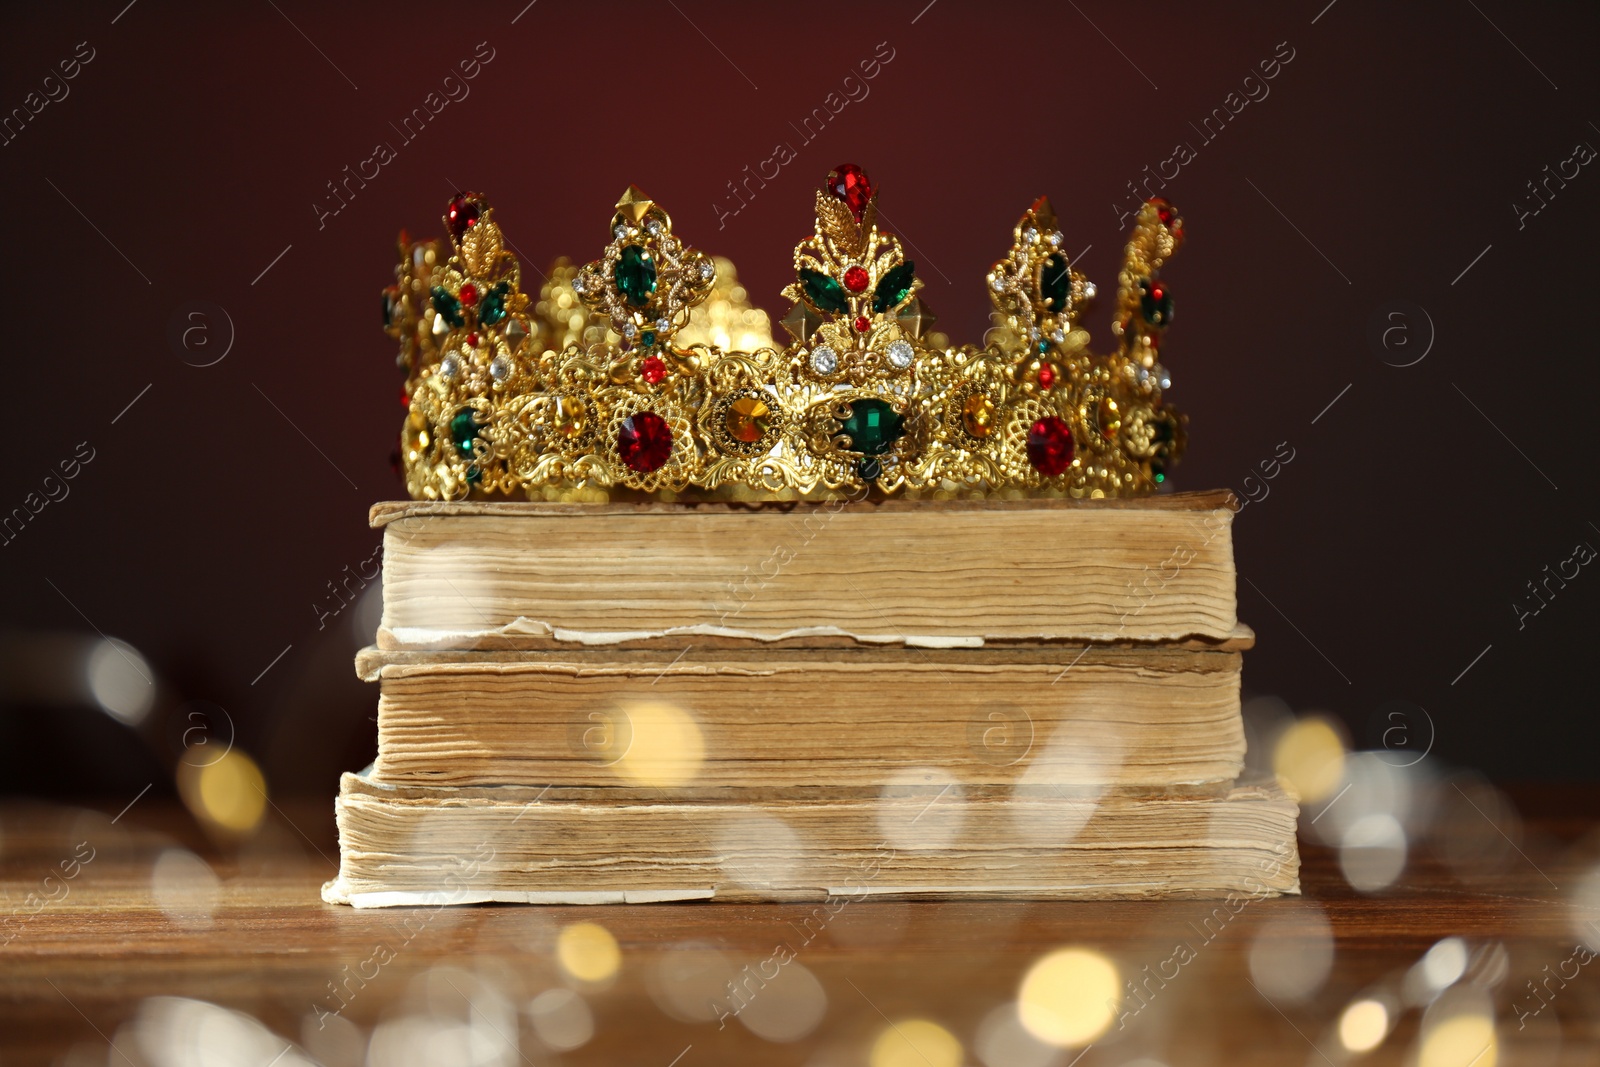 Photo of Beautiful golden crown, old books and fairy lights on brown background. Fantasy item